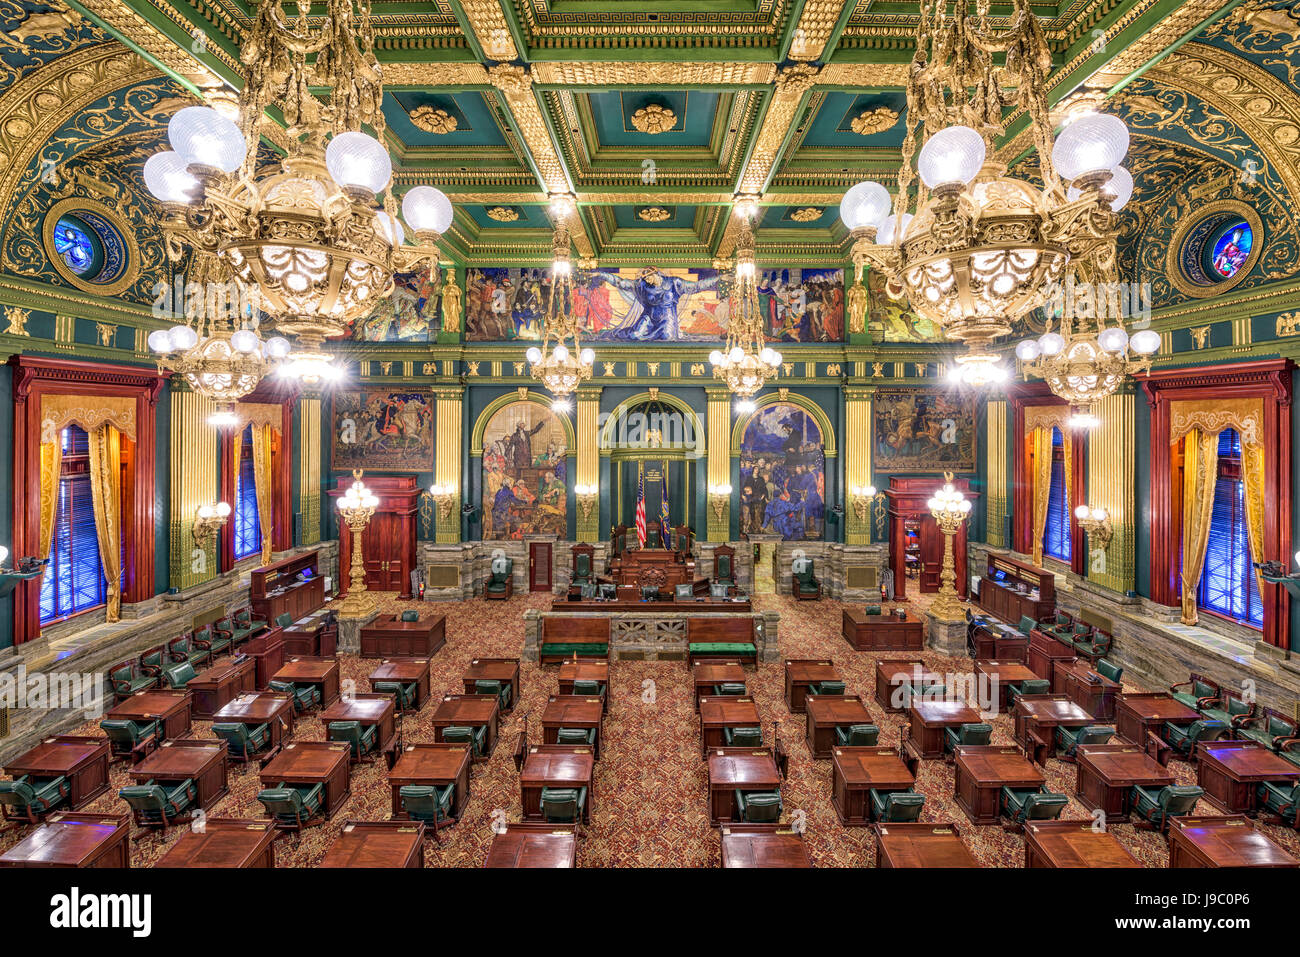 HARRISBURG, PENNSYLVANIA - NOVEMBER 23, 2016: The Chamber of the House of Representatives in the Pennsylvania State Capitol. Stock Photo